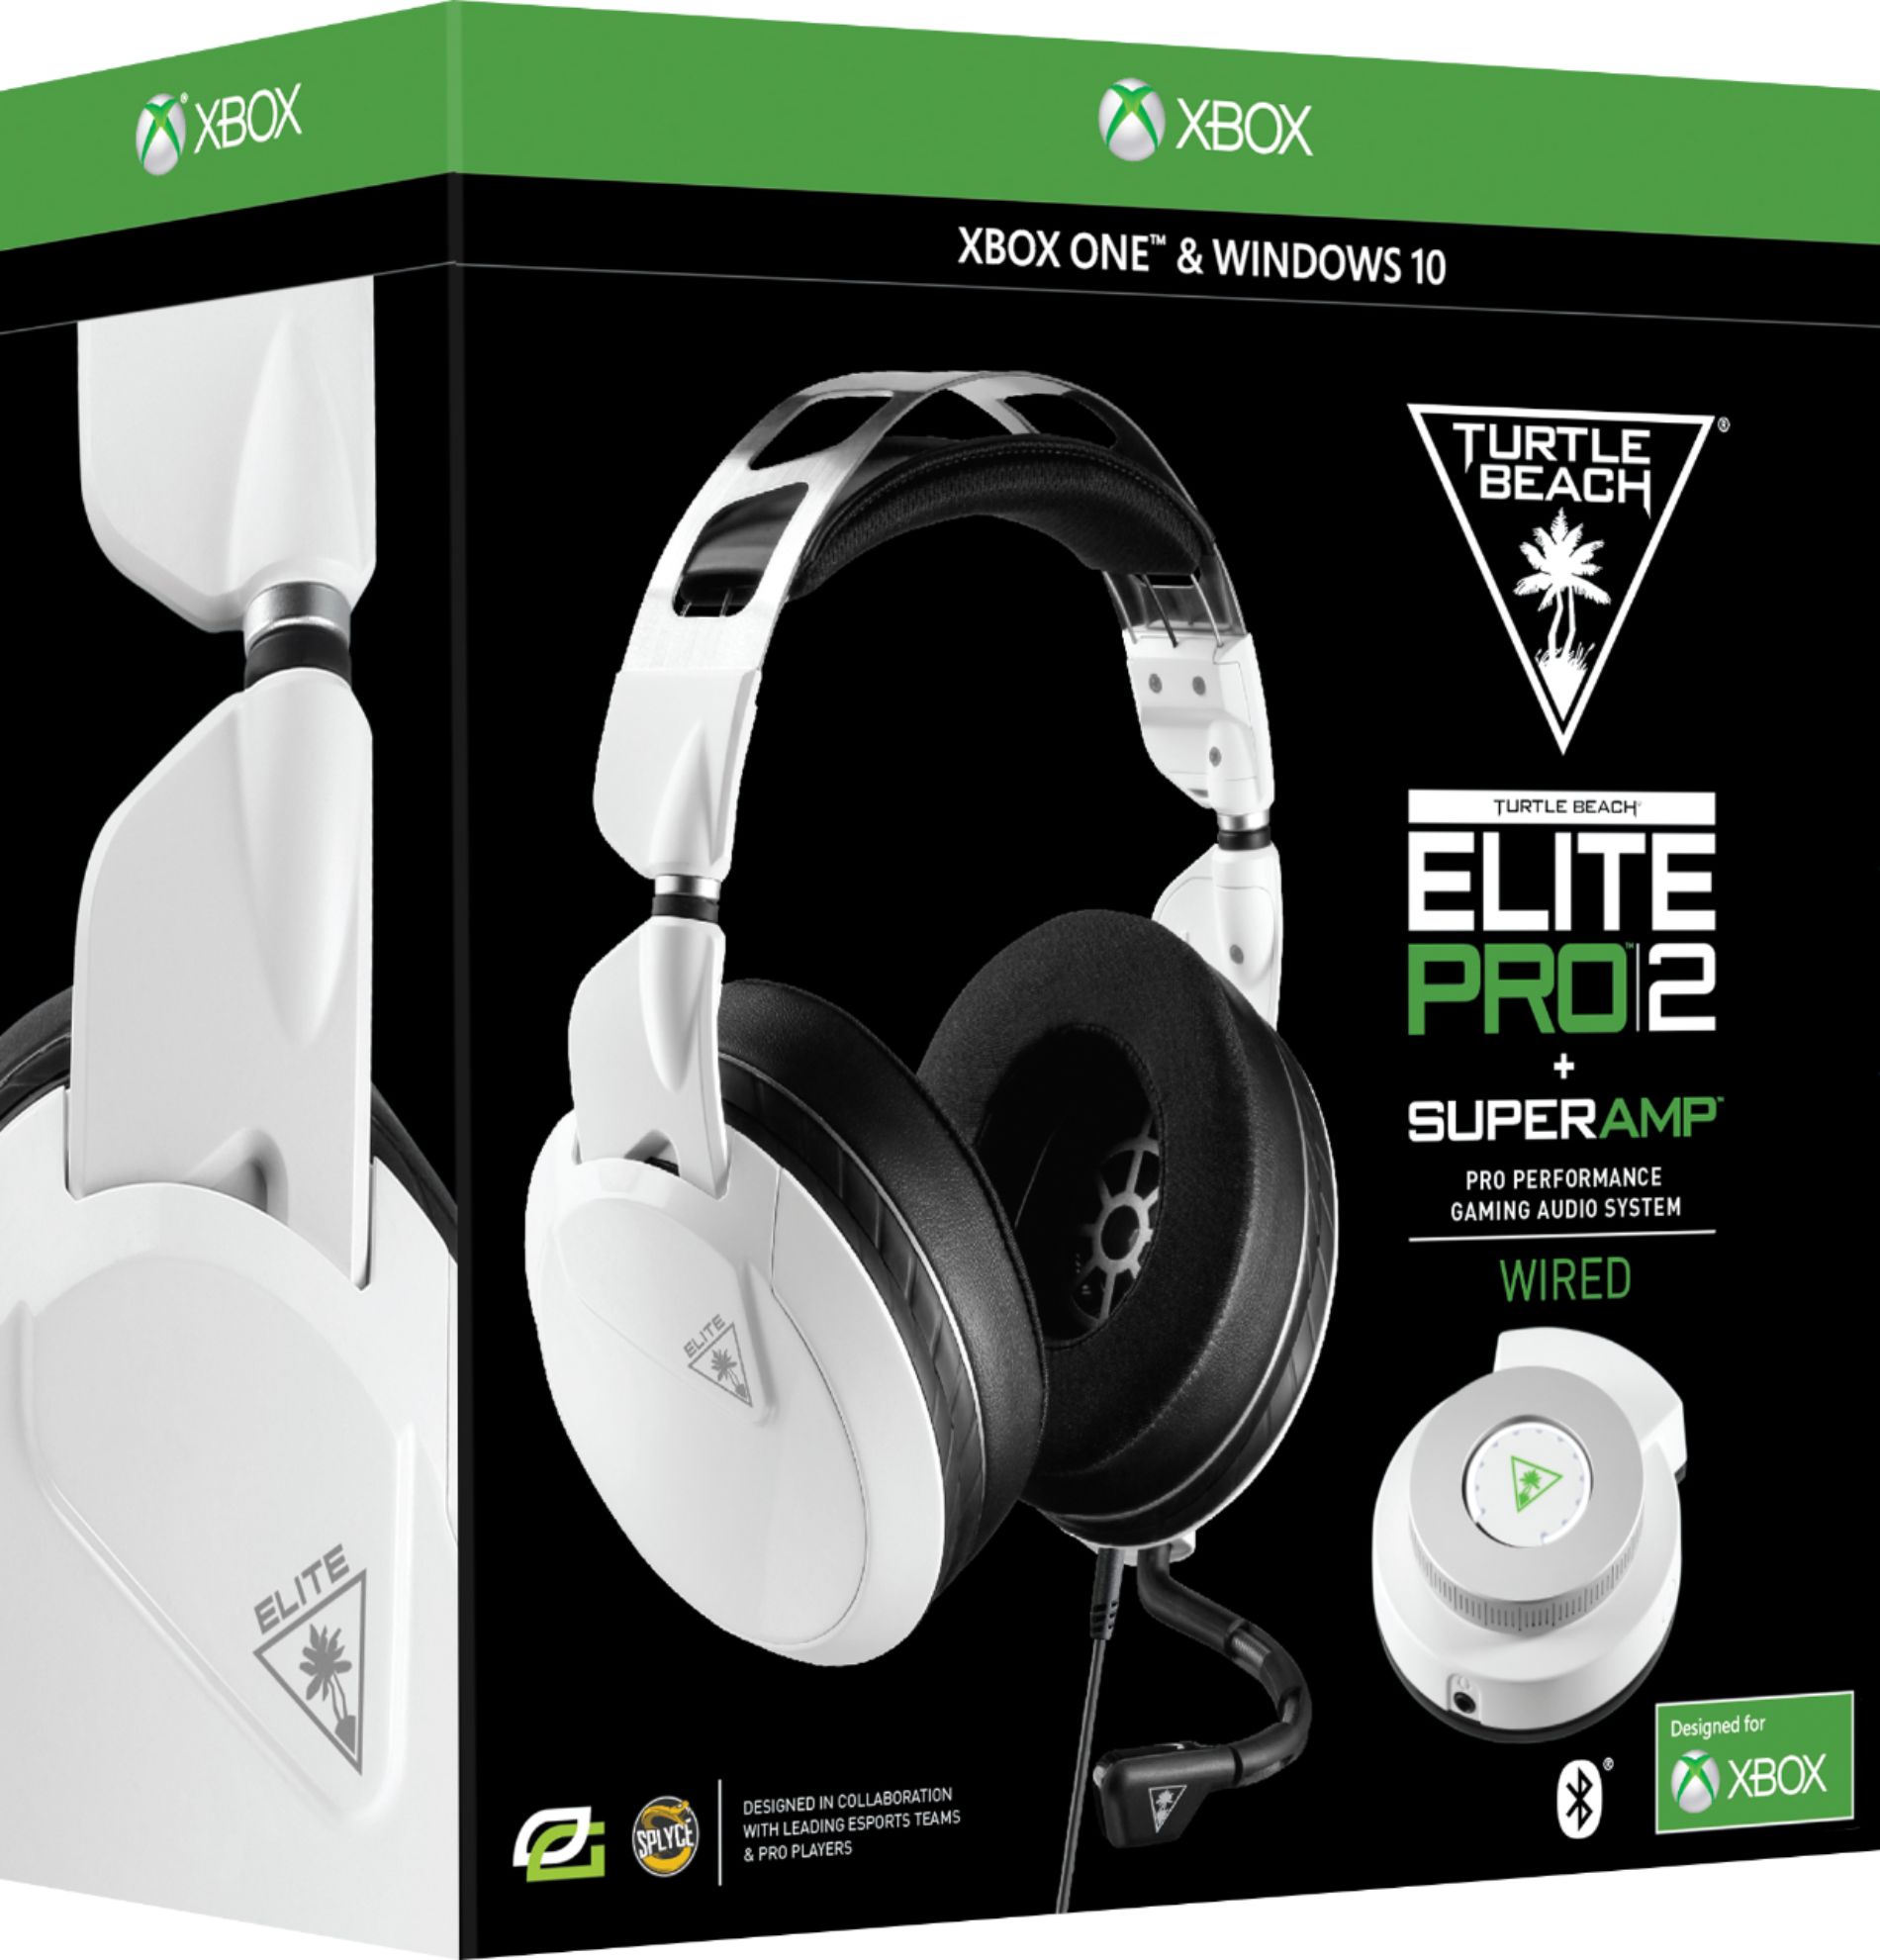 Best Buy: Turtle Beach Elite Pro 2 Wired Gaming Headset with Elite